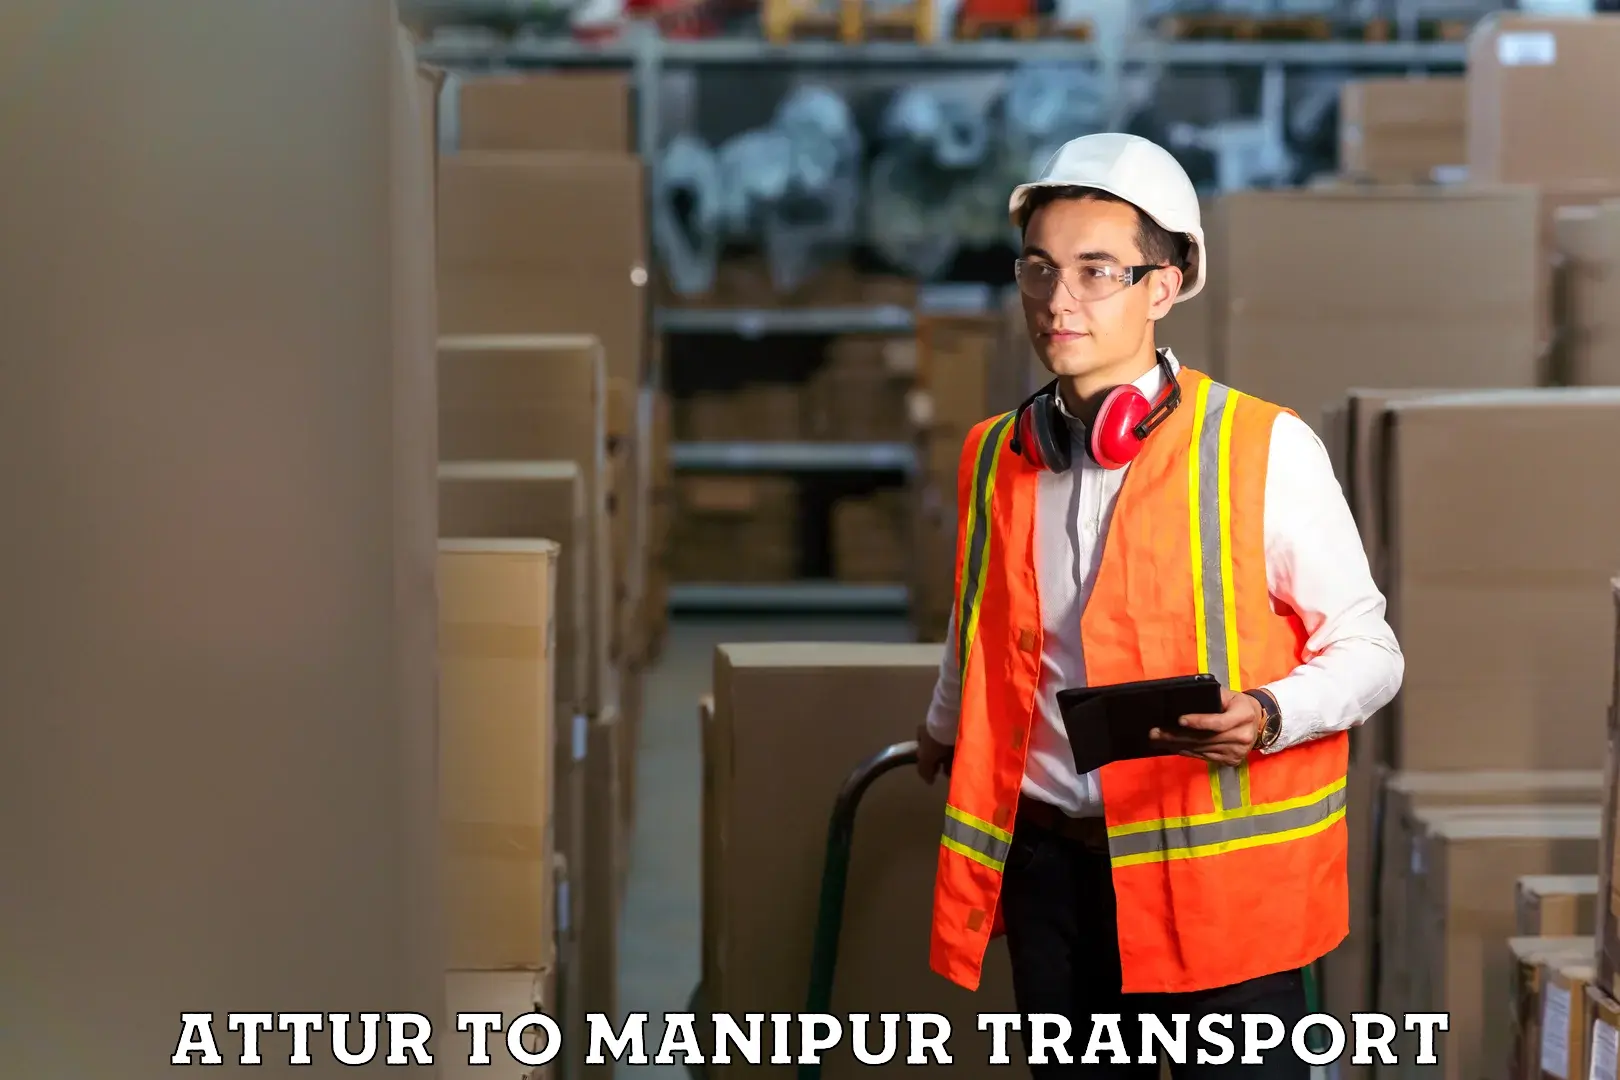 Delivery service Attur to Manipur